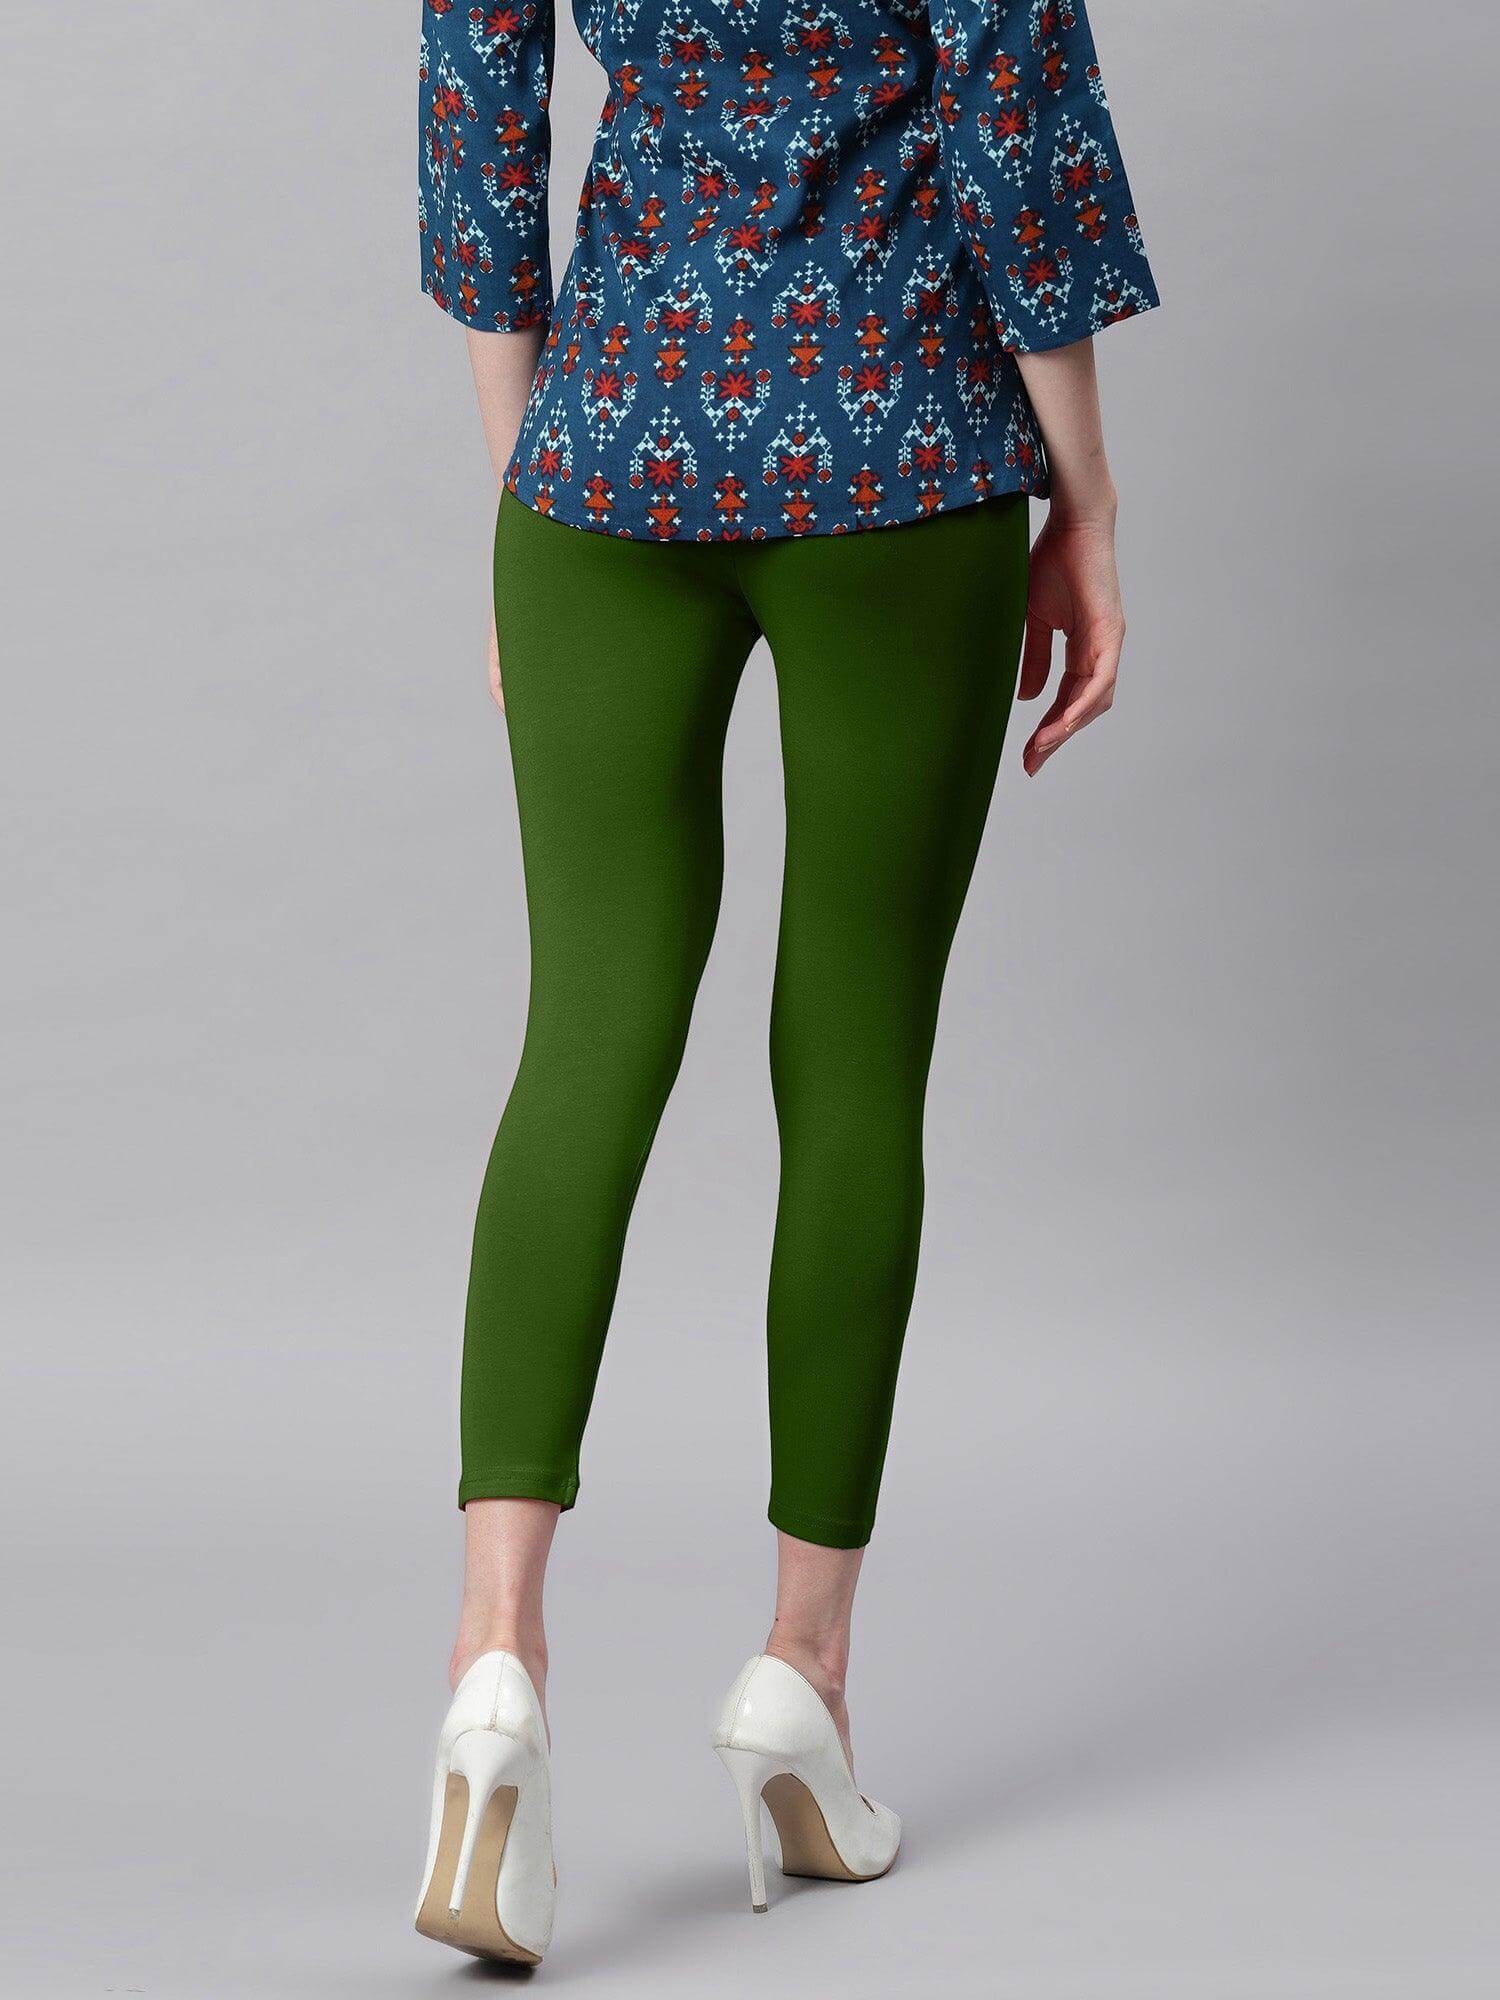 EMBROIDERY LEGGINGS VOL-6 BY PSYNA 60 TO 69 SERIES STYLISH COLORFUL  BEAUTIFUL FANCY CASUAL WEAR